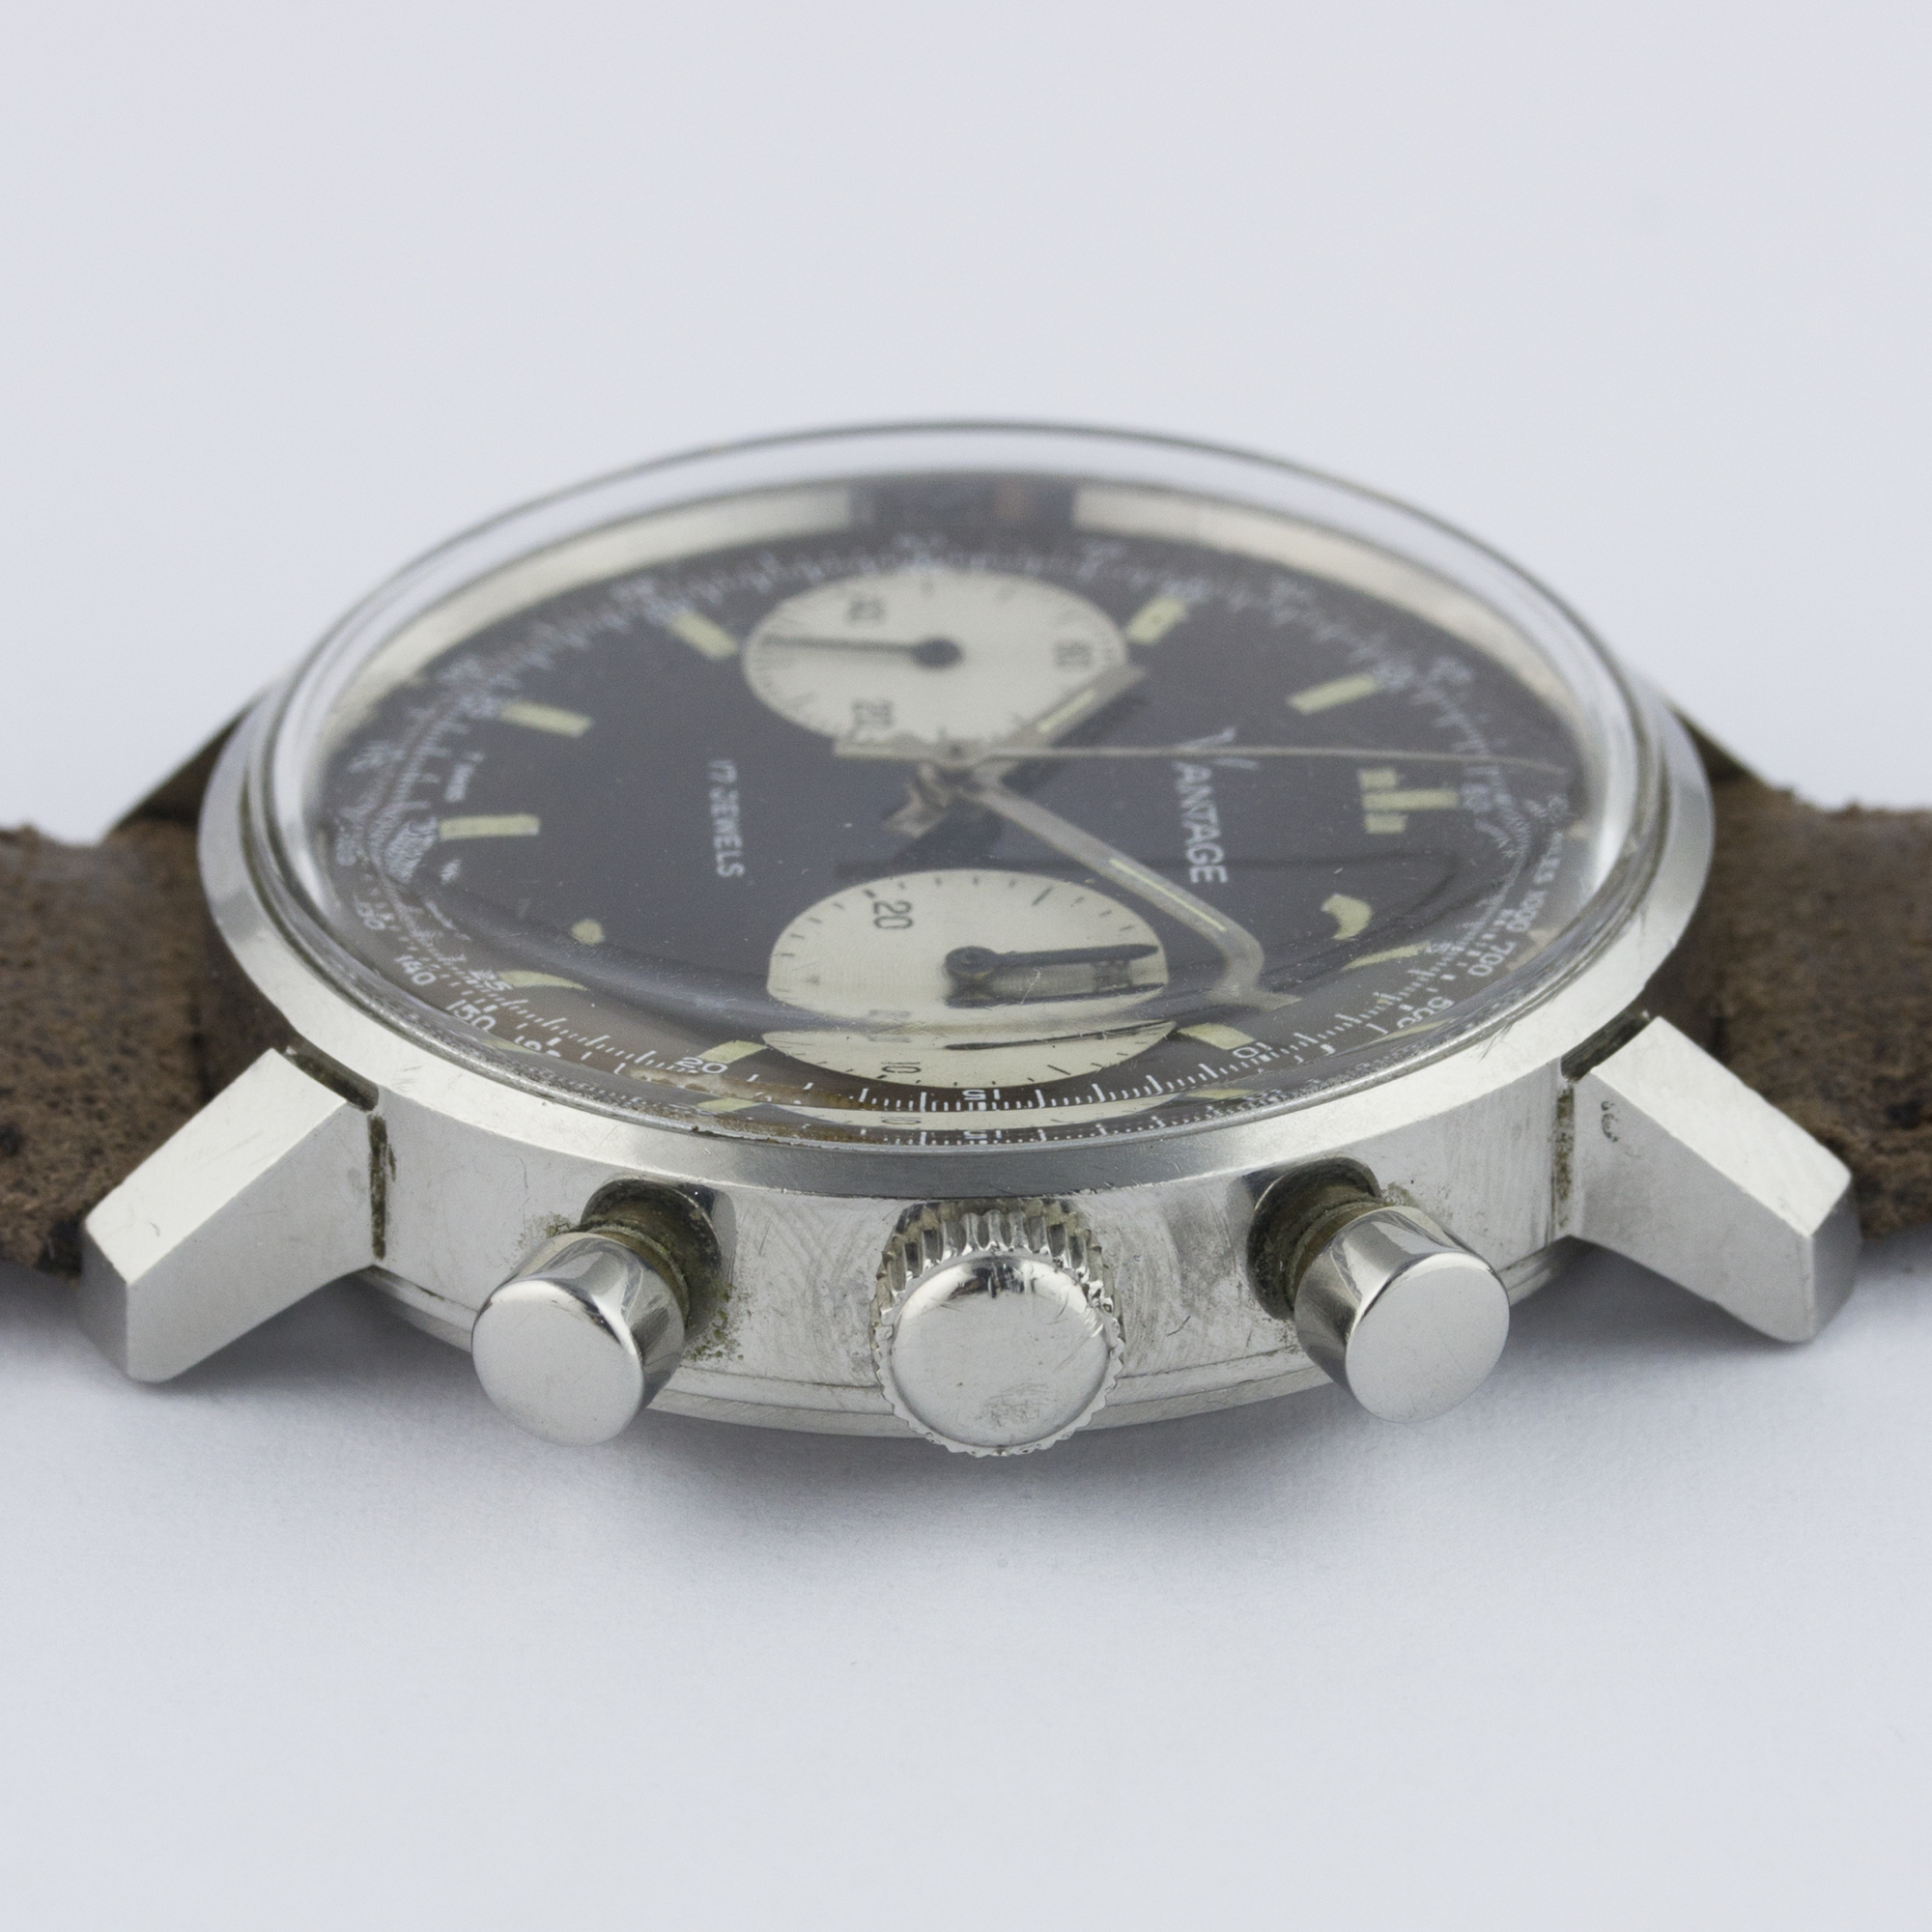 A GENTLEMAN’S STAINLESS STEEL VANTAGE CHRONOGRAPH WRIST WATCH CIRCA 1970 WITH "CHOCOLATE" DIAL D: - Image 7 of 8